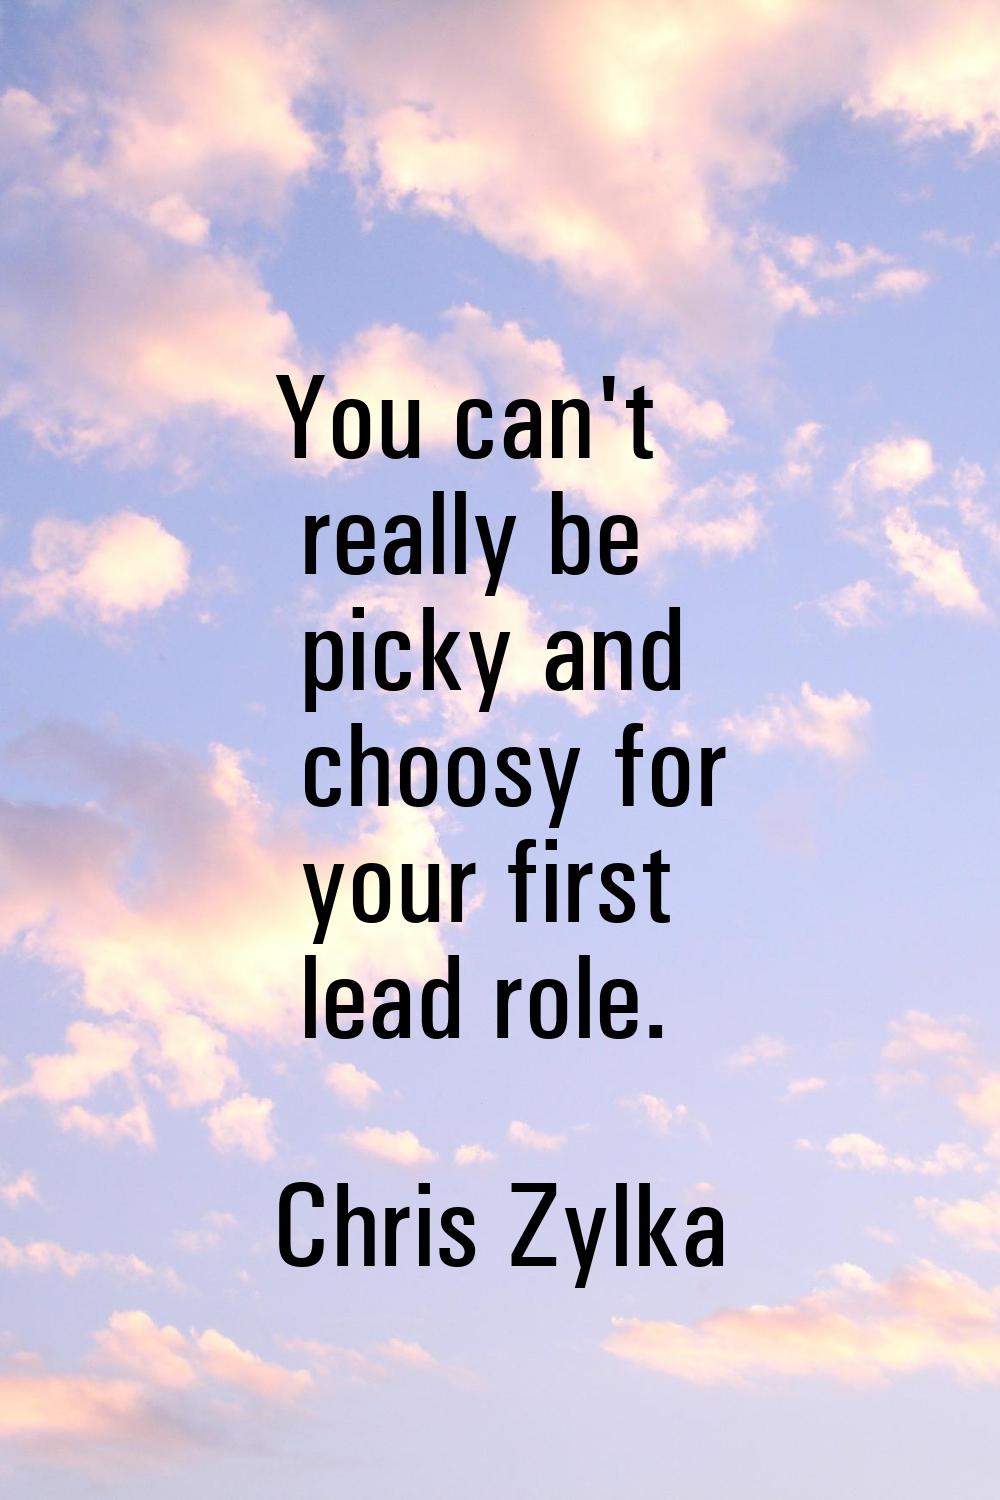 You can't really be picky and choosy for your first lead role.